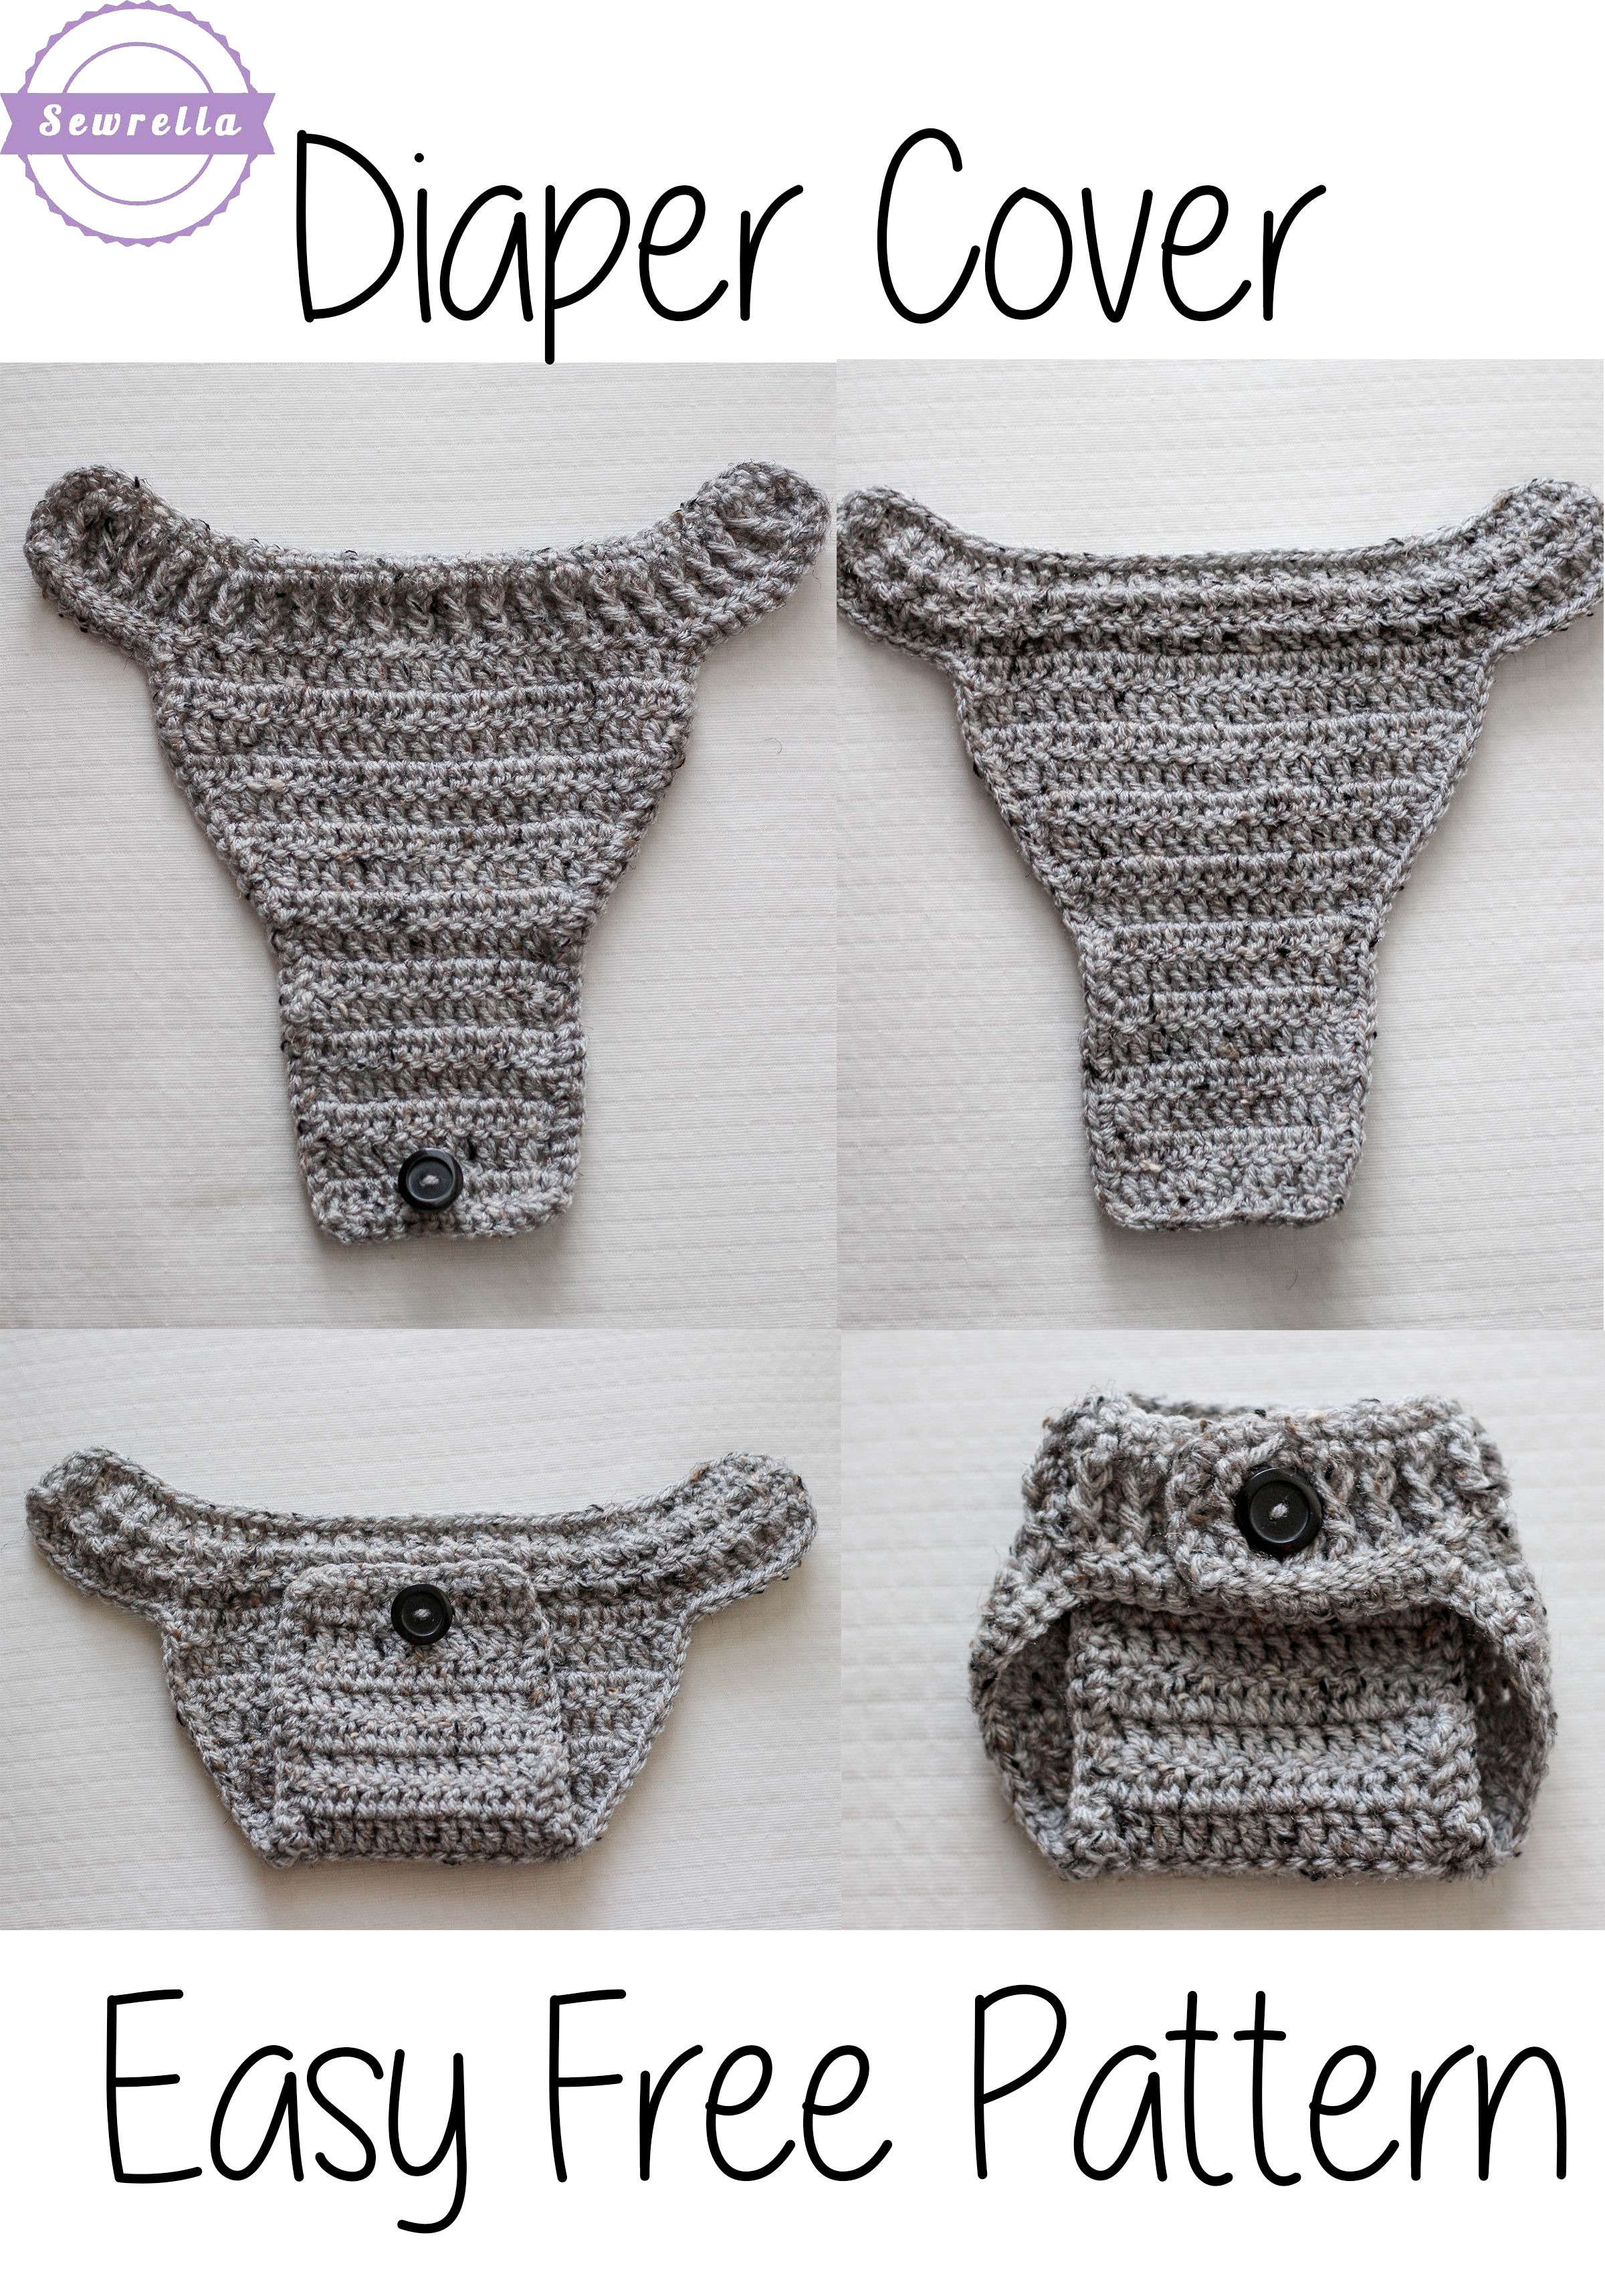 Crochet Baby Hat And Diaper Cover Pattern The Parker Crochet Diaper Cover Blogger Crochet Patterns We Love